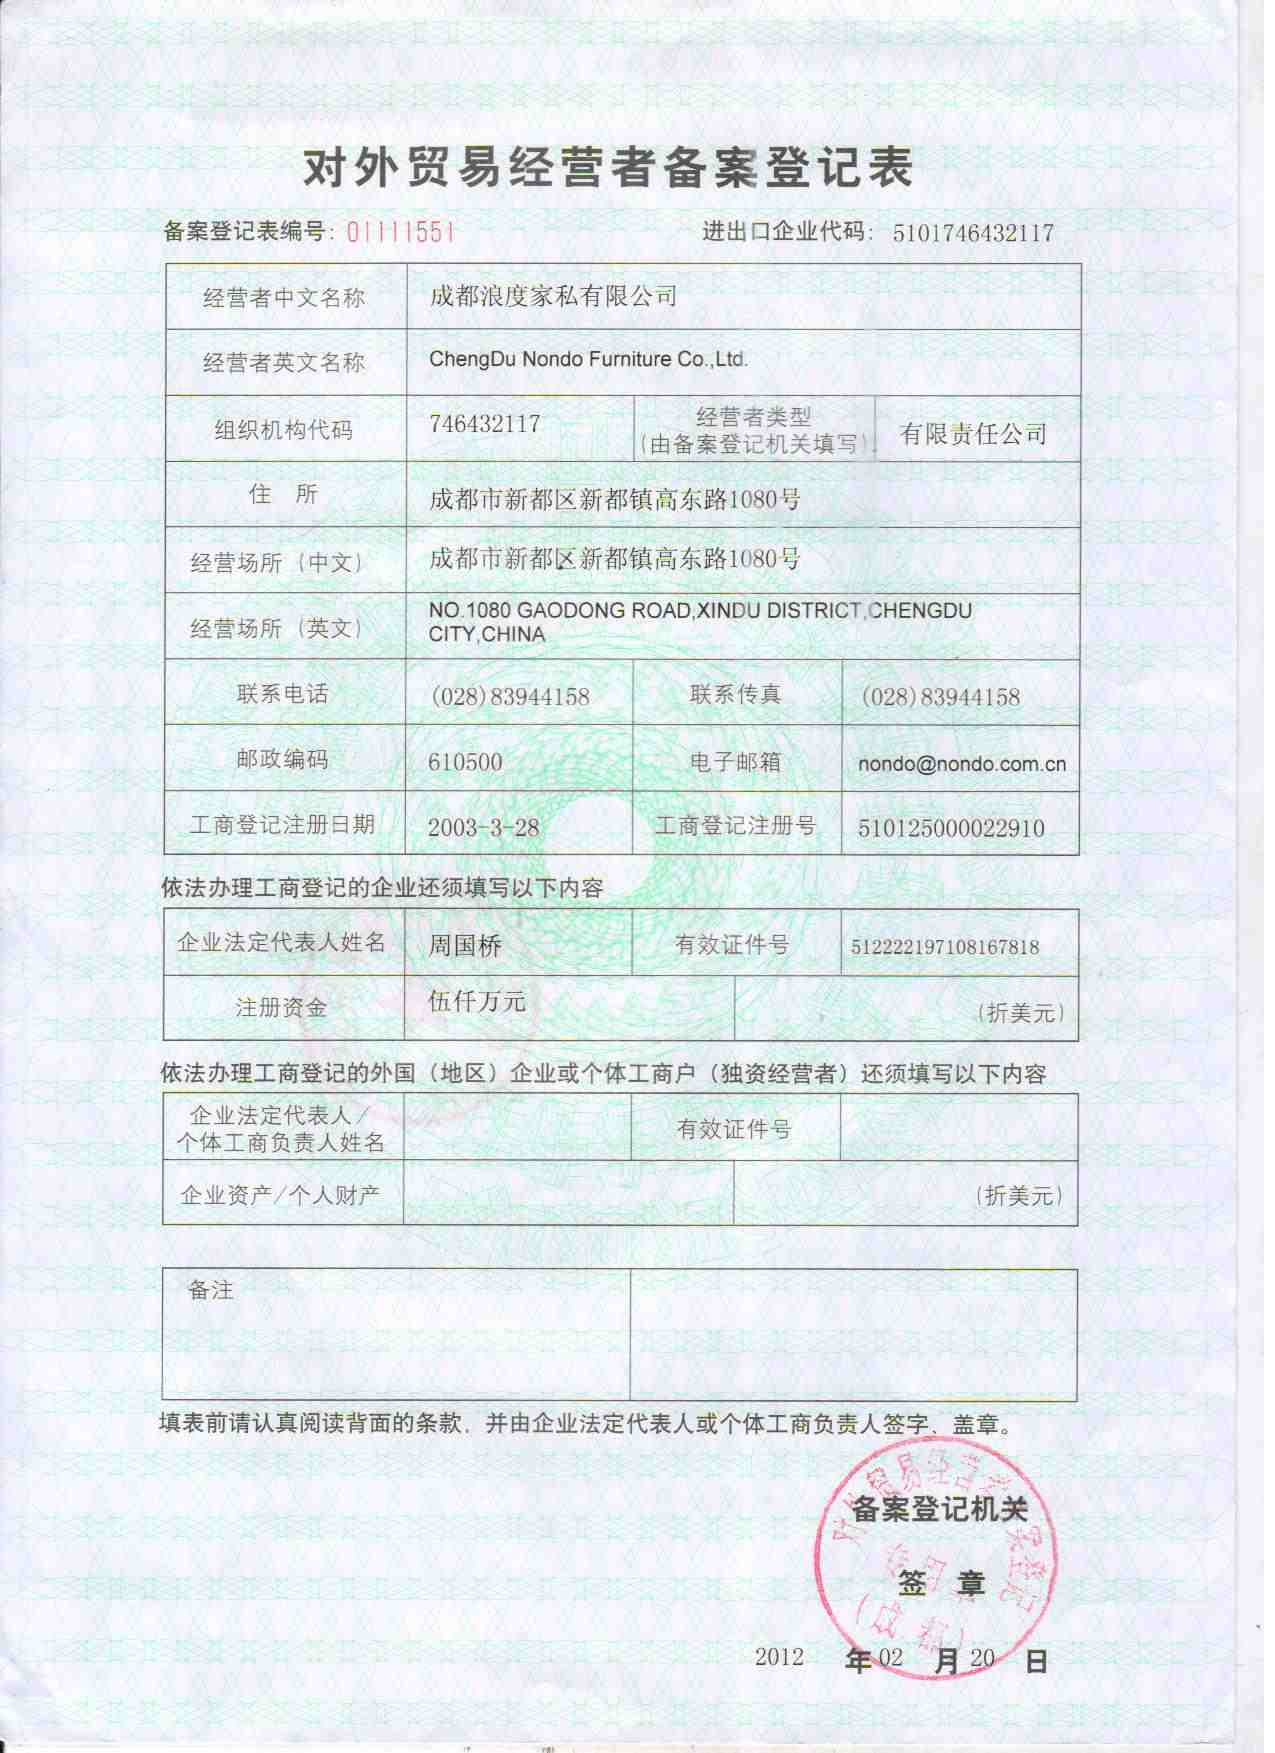 Foreign Trade licence